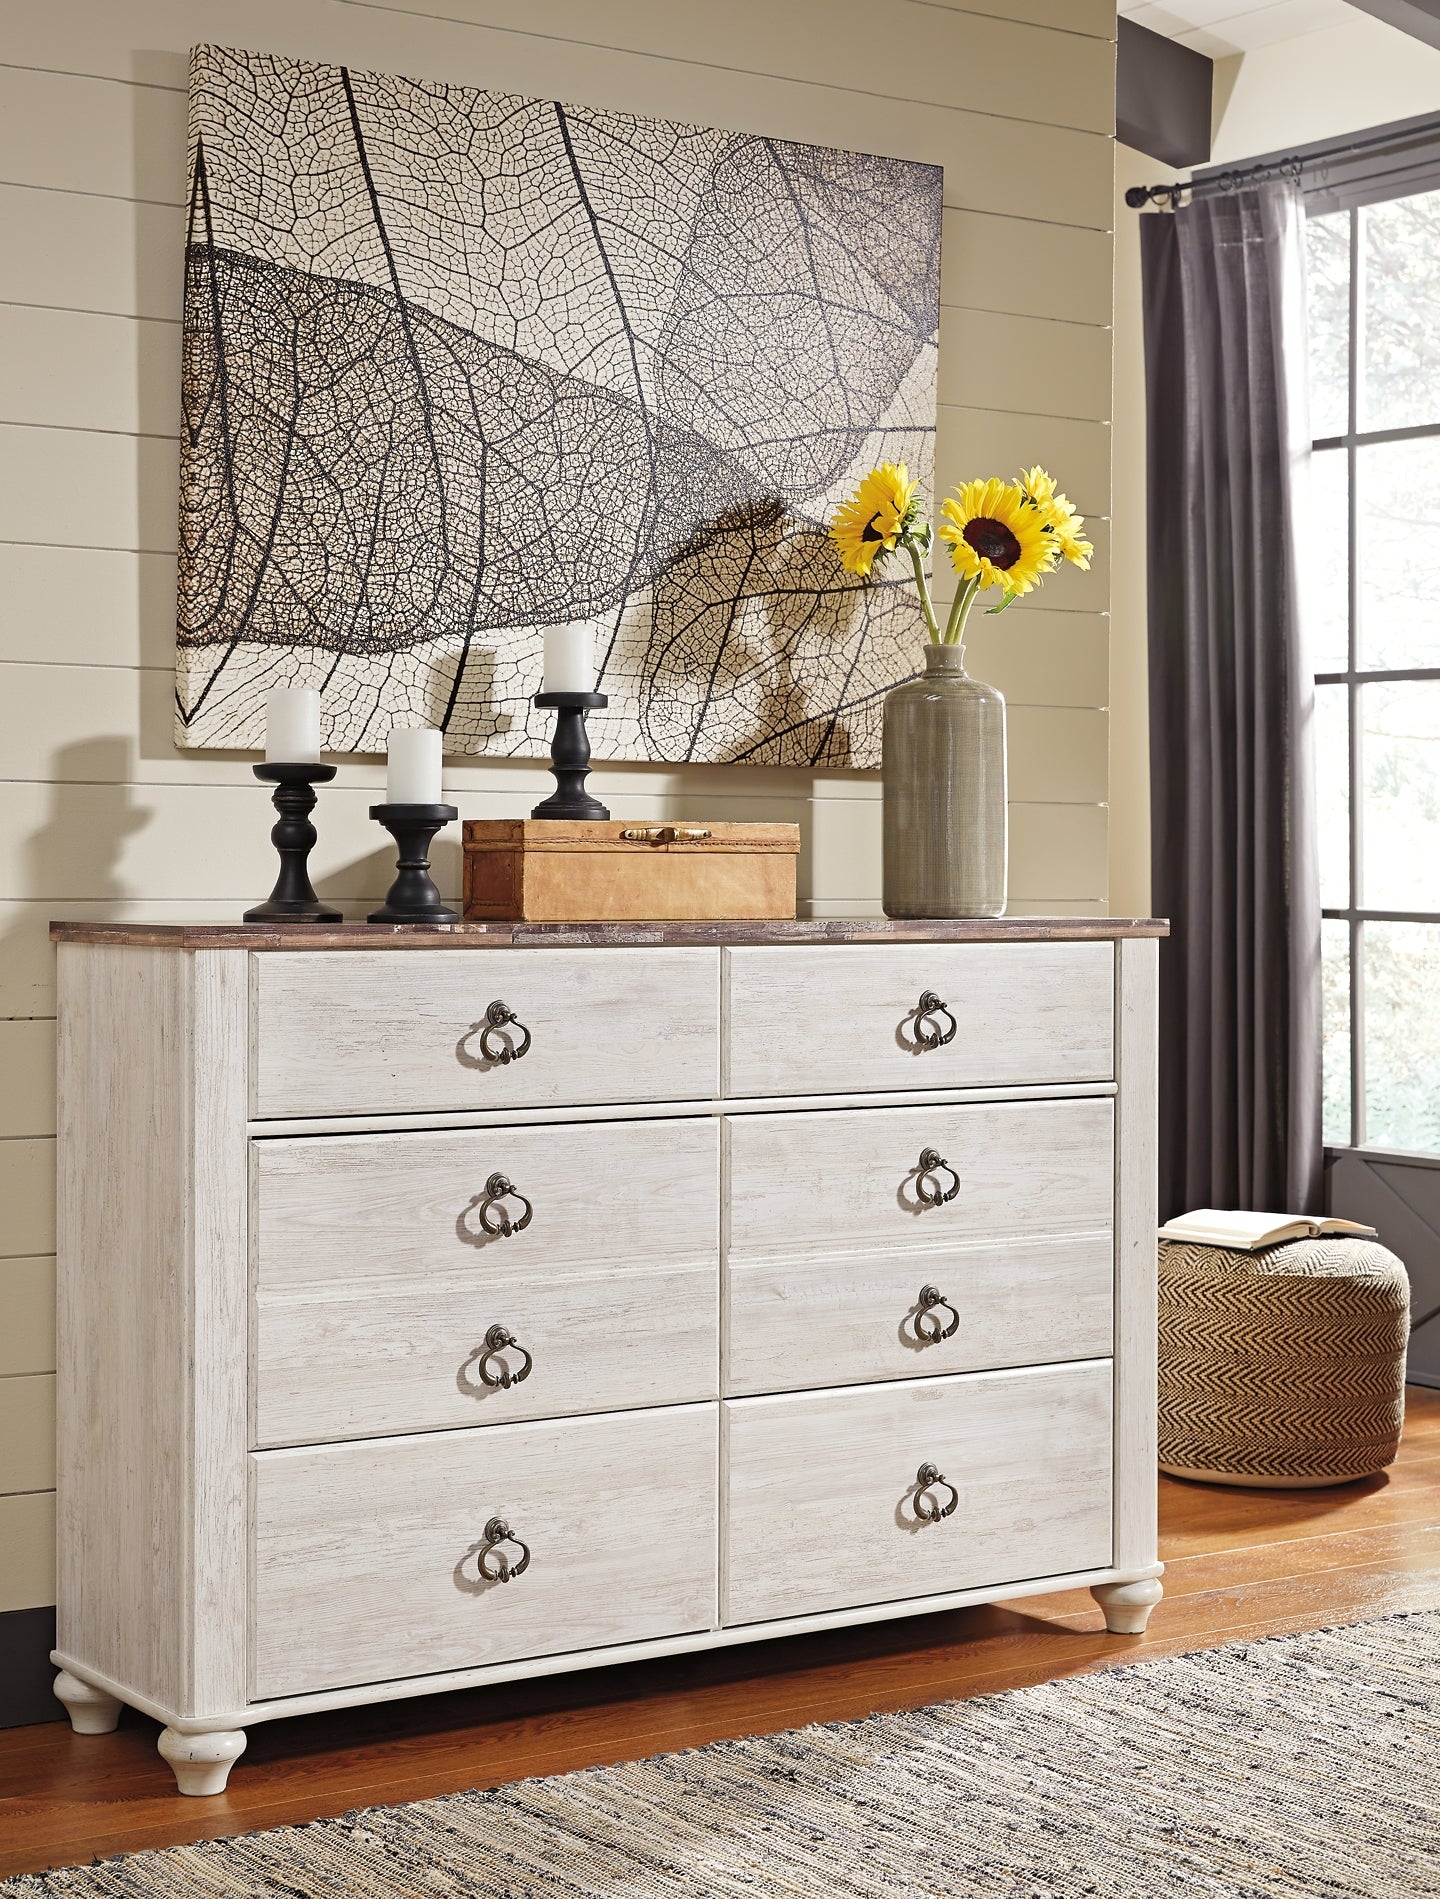 Willowton Six Drawer Dresser at Walker Mattress and Furniture Locations in Cedar Park and Belton TX.